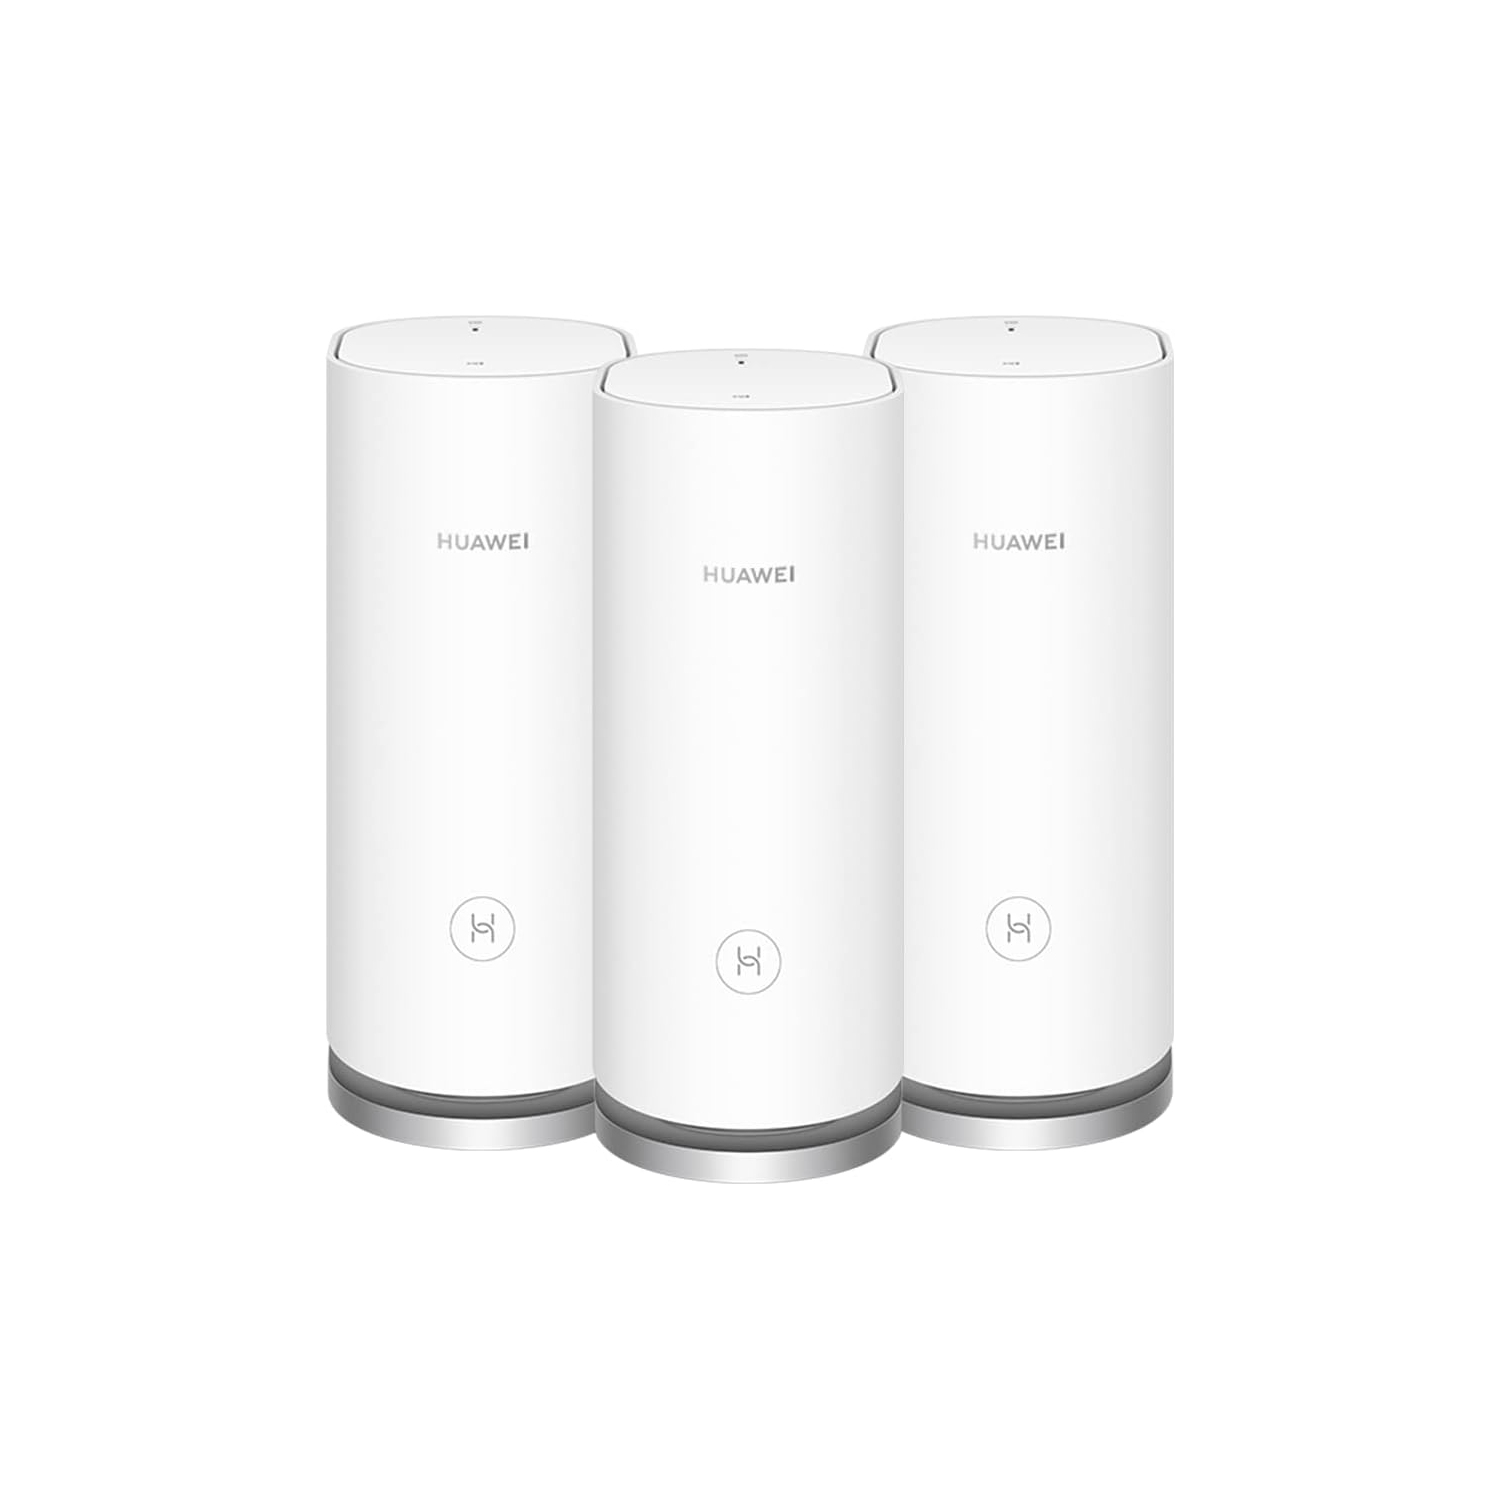 HUAWEI WiFi Mesh 3 AX3000 - Whole Home Mesh WiFi System, Seamless & Speedy, Up to 3000Mbps, Connect 250+ Devices, Ultra-Fast Connection in Big-Multi Homes – Pack of 3